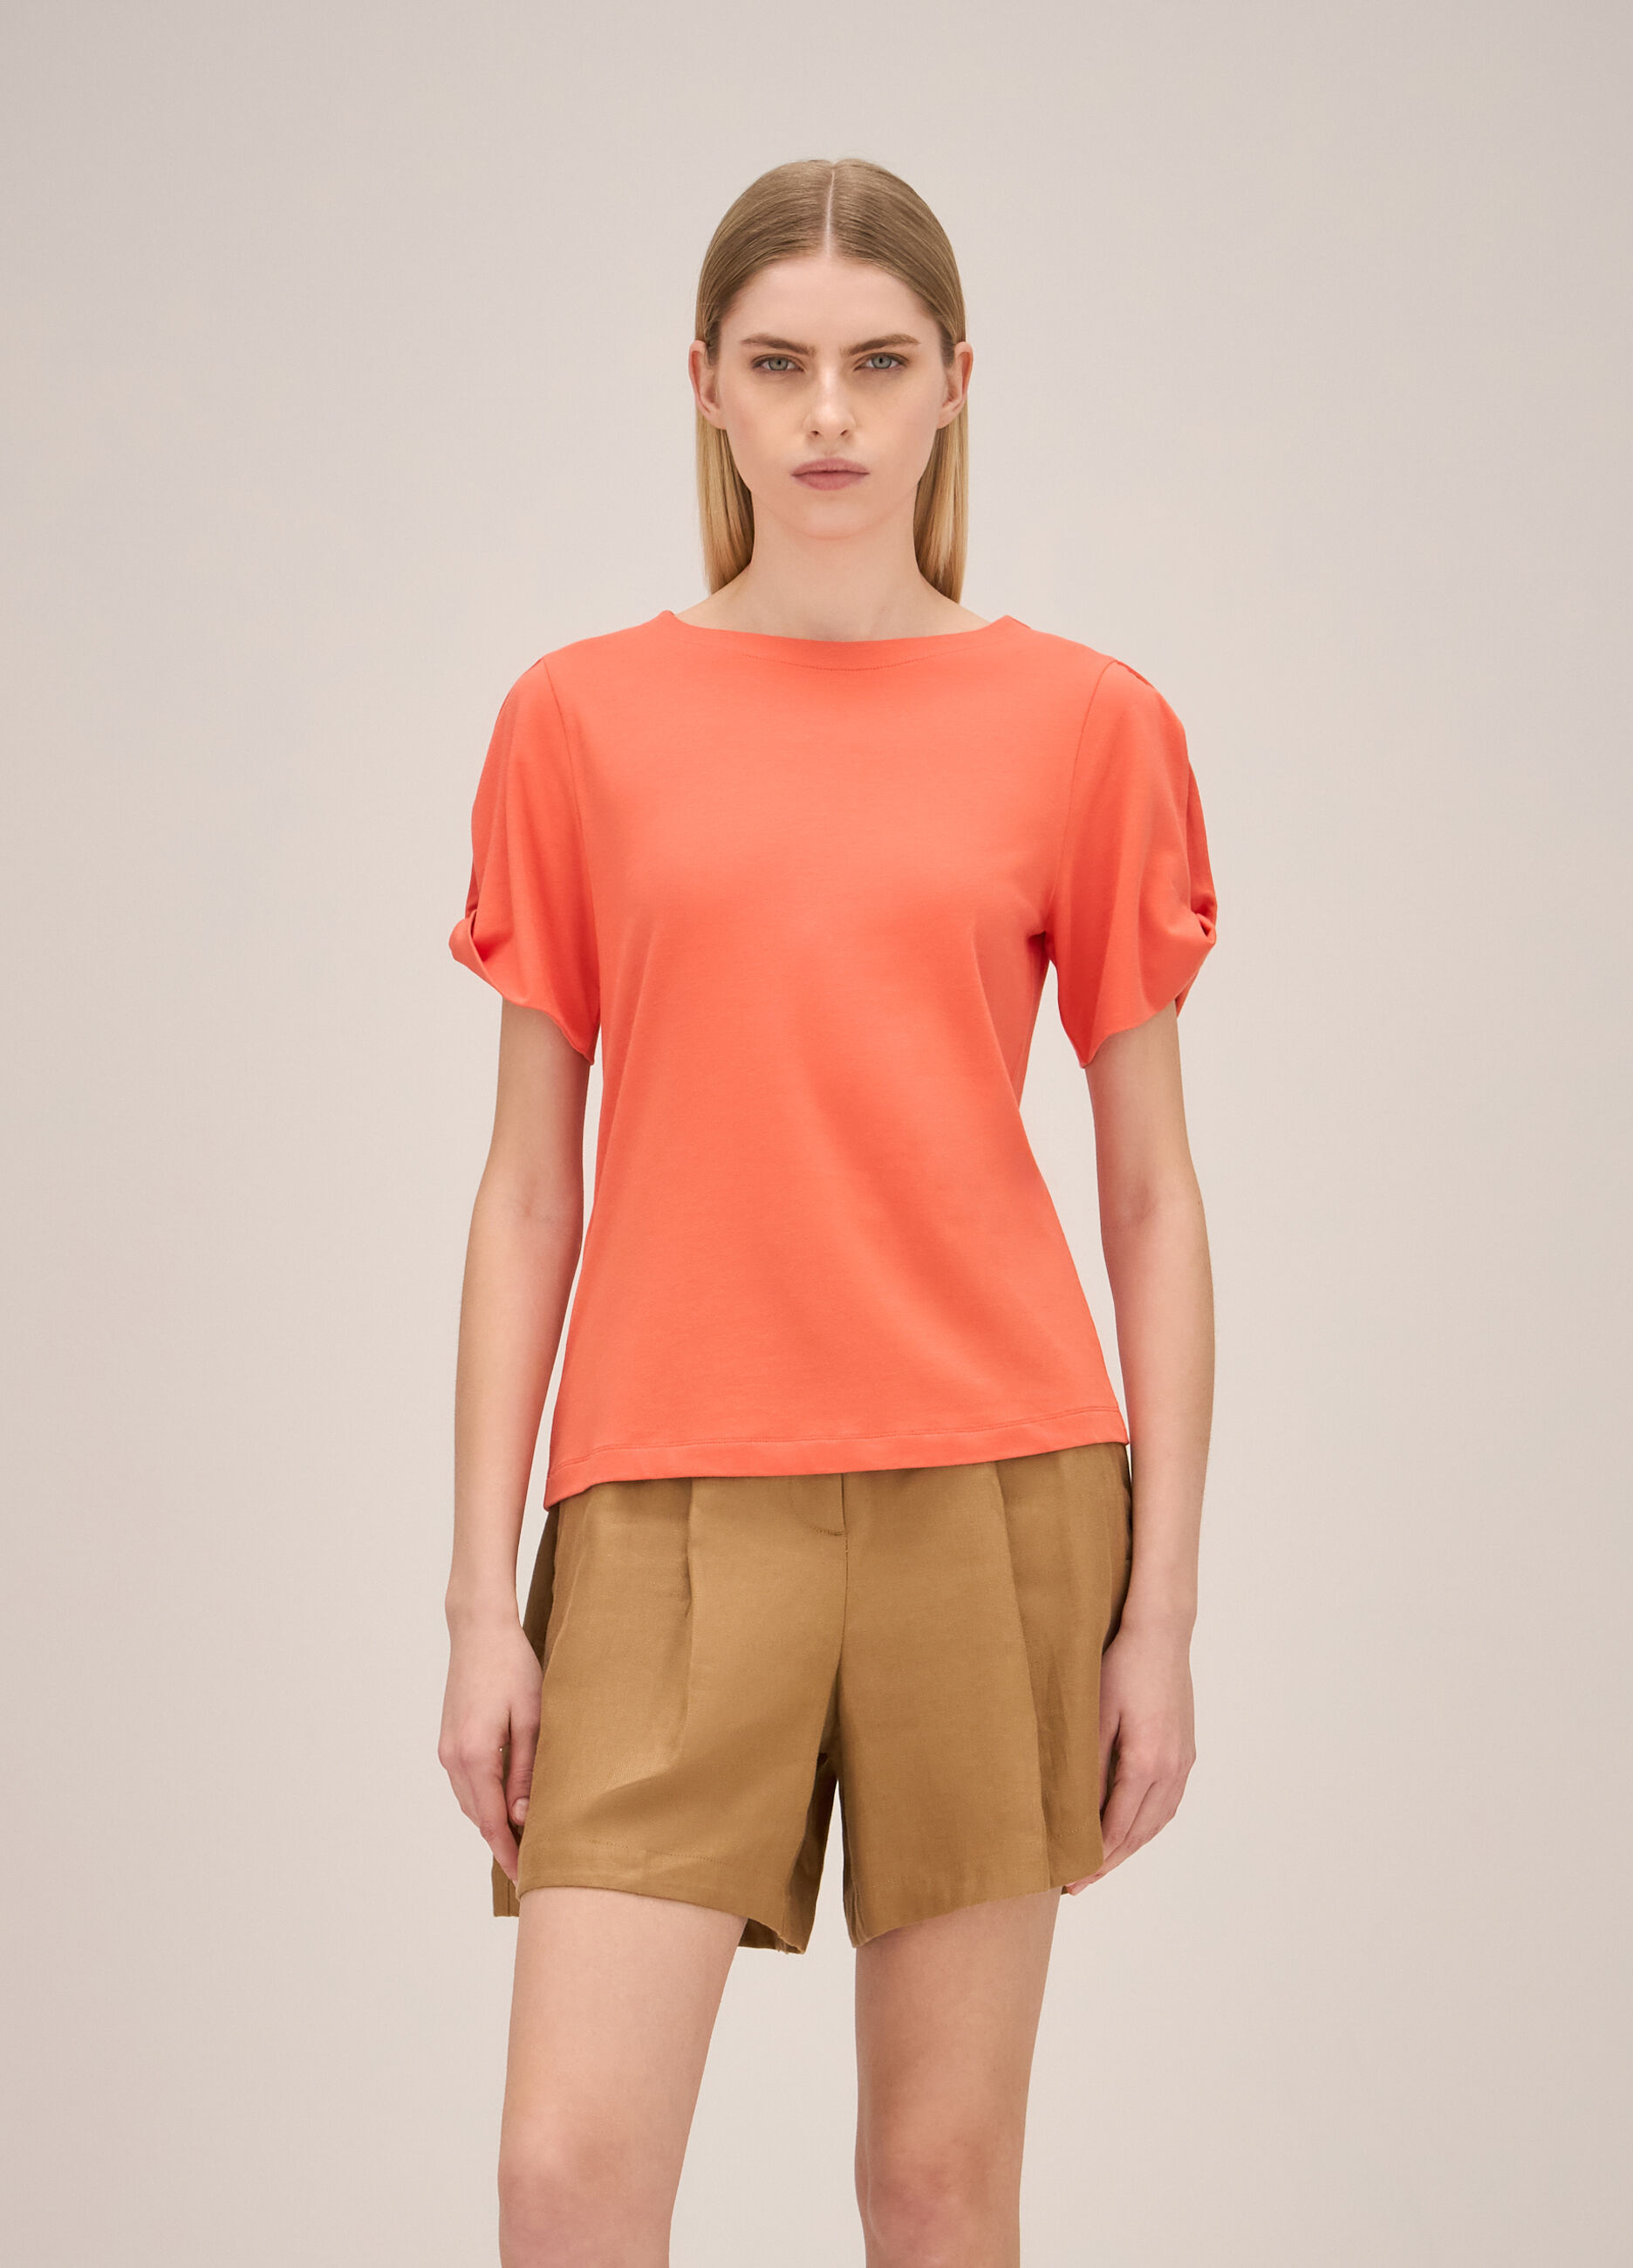 Cotton and modal T-shirt_1